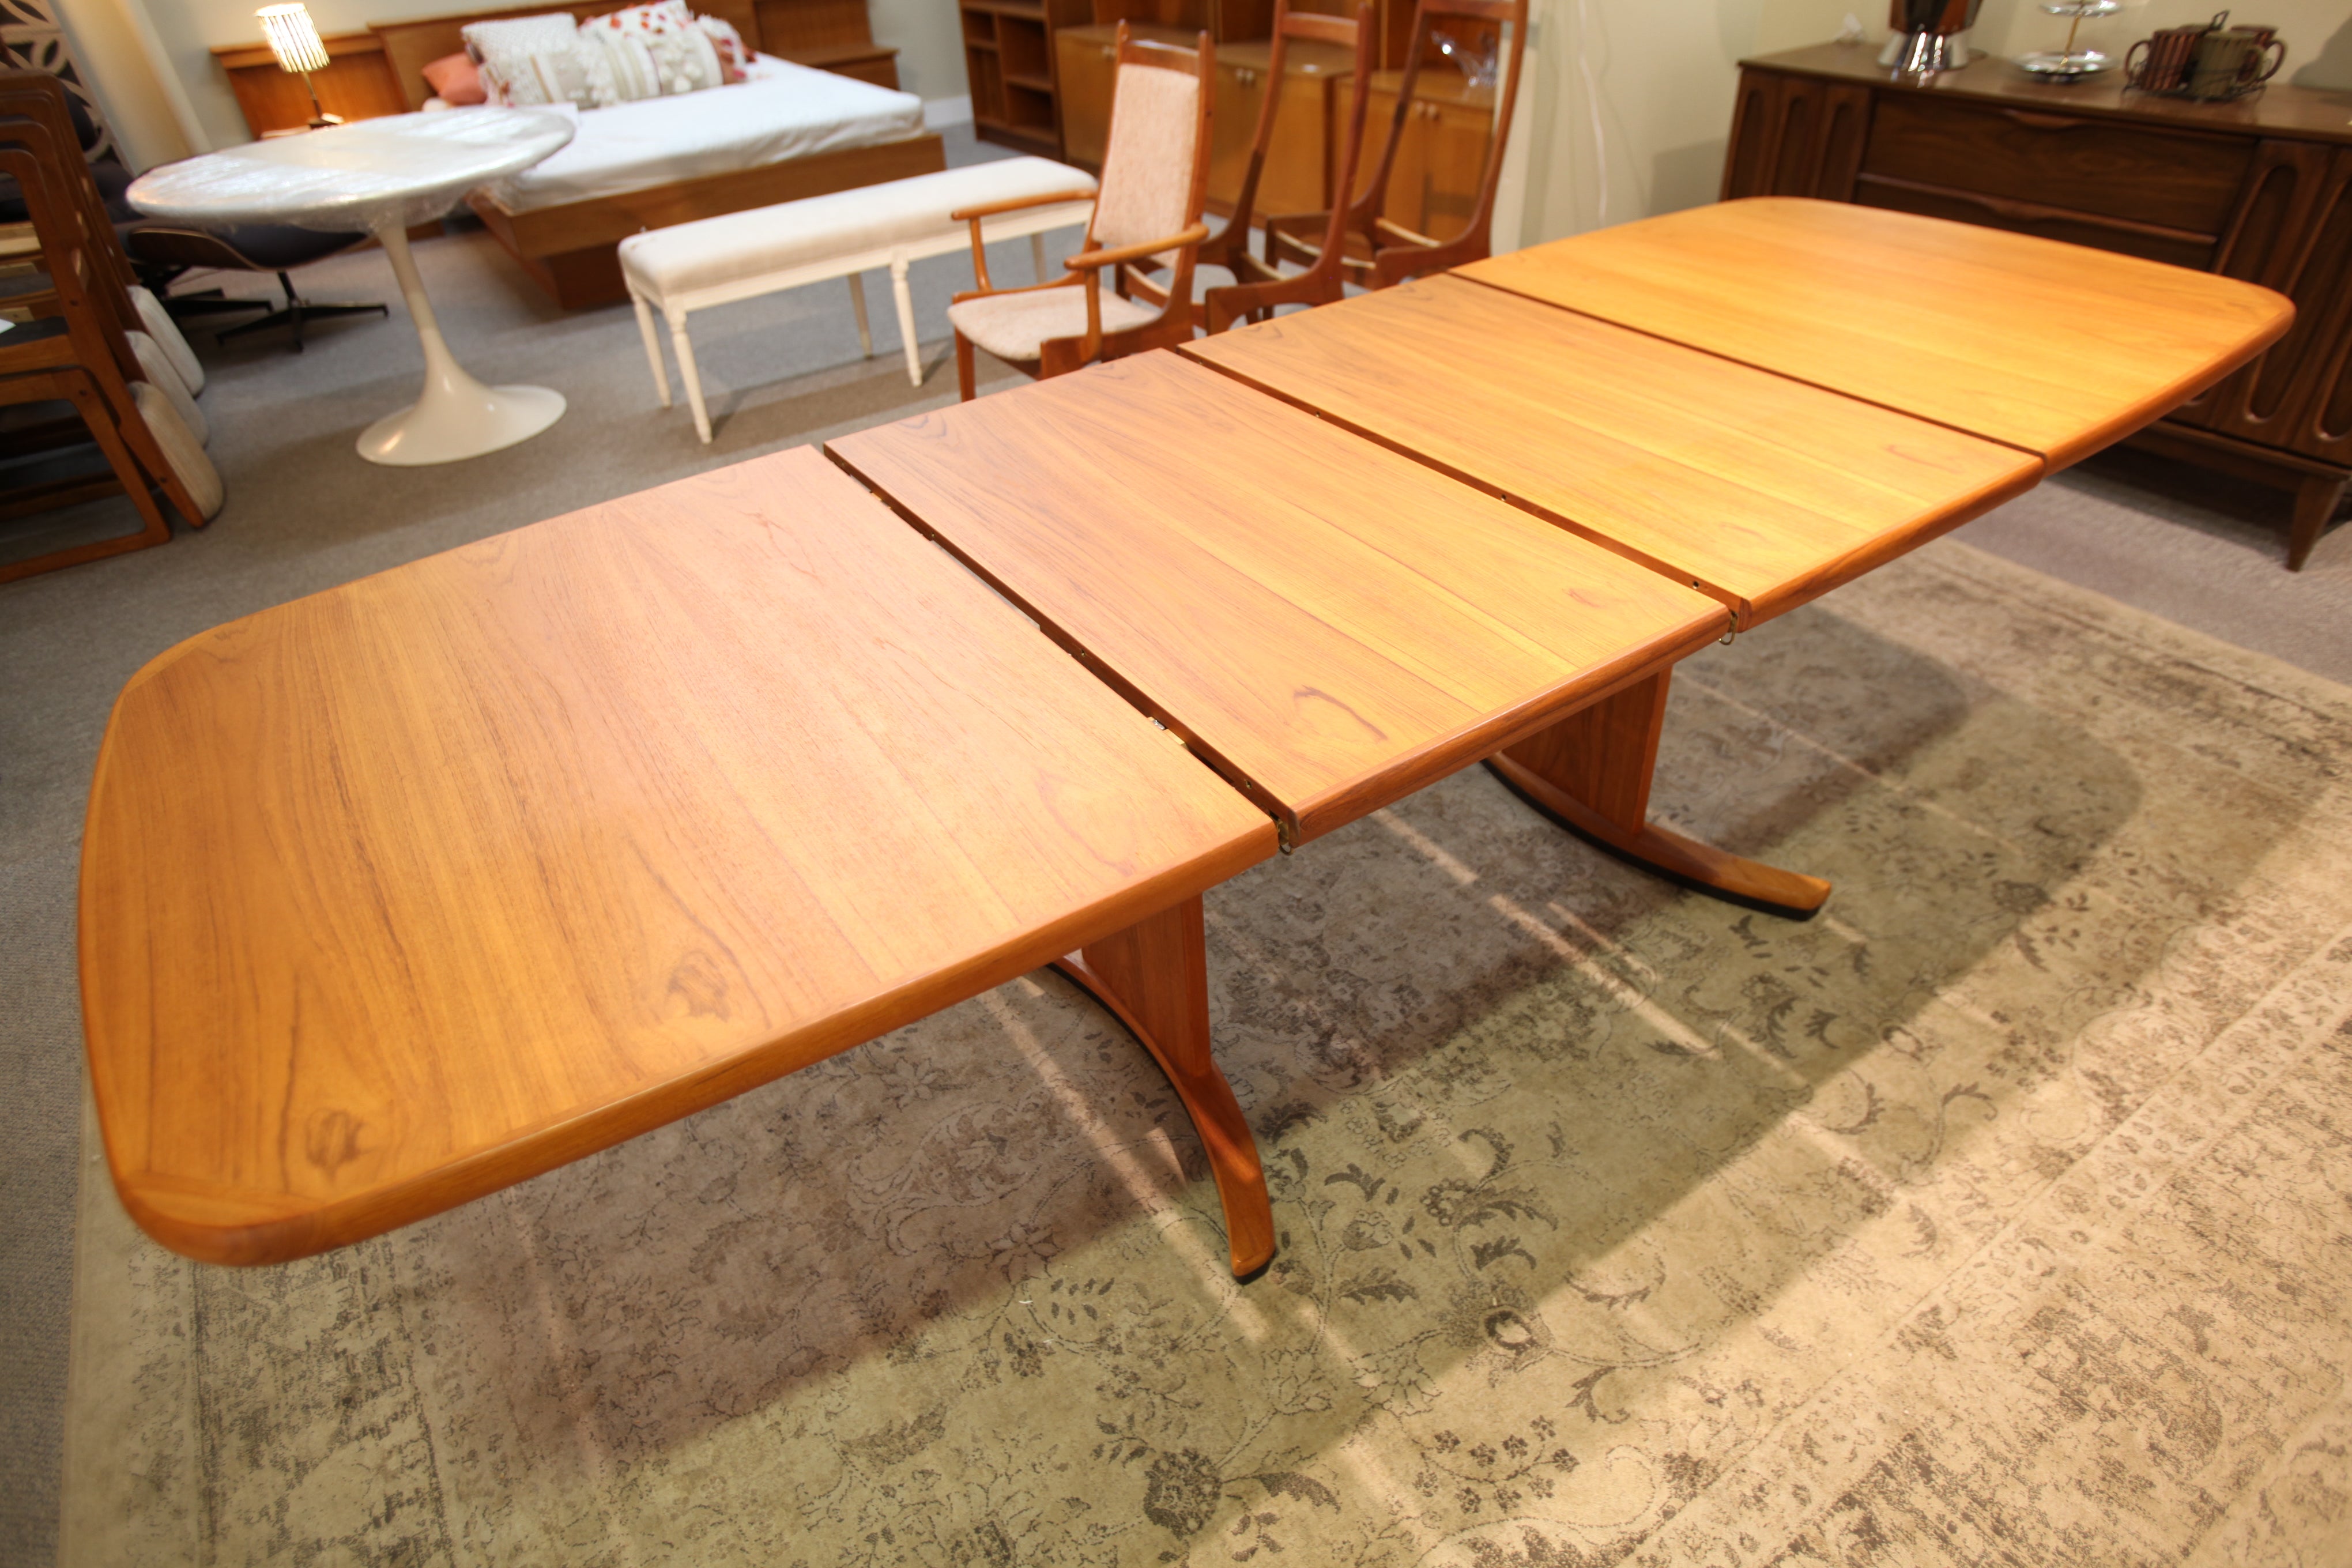 Fabulous Long Teak Table w/ 2 Leafs and Mechanical Drive (101" x 38") or (61.5" x 38")